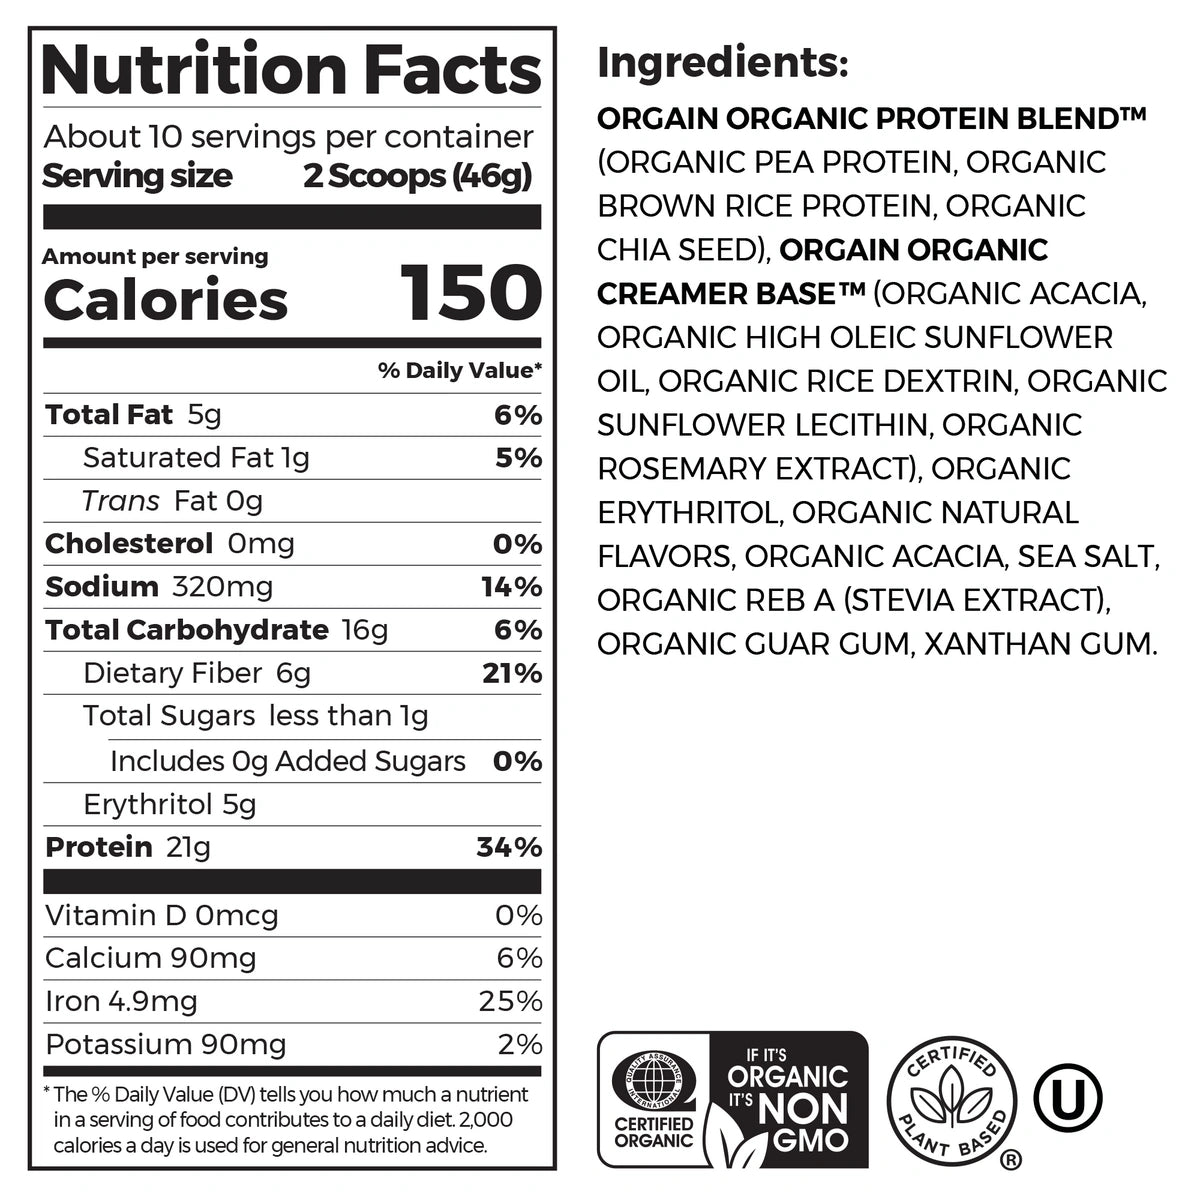 Nutrition Fact Panel and List of ingredients for Organic Protein Plant Based Protein Powder - Vanilla Bean Flavor in the 2.03lb Canister Size